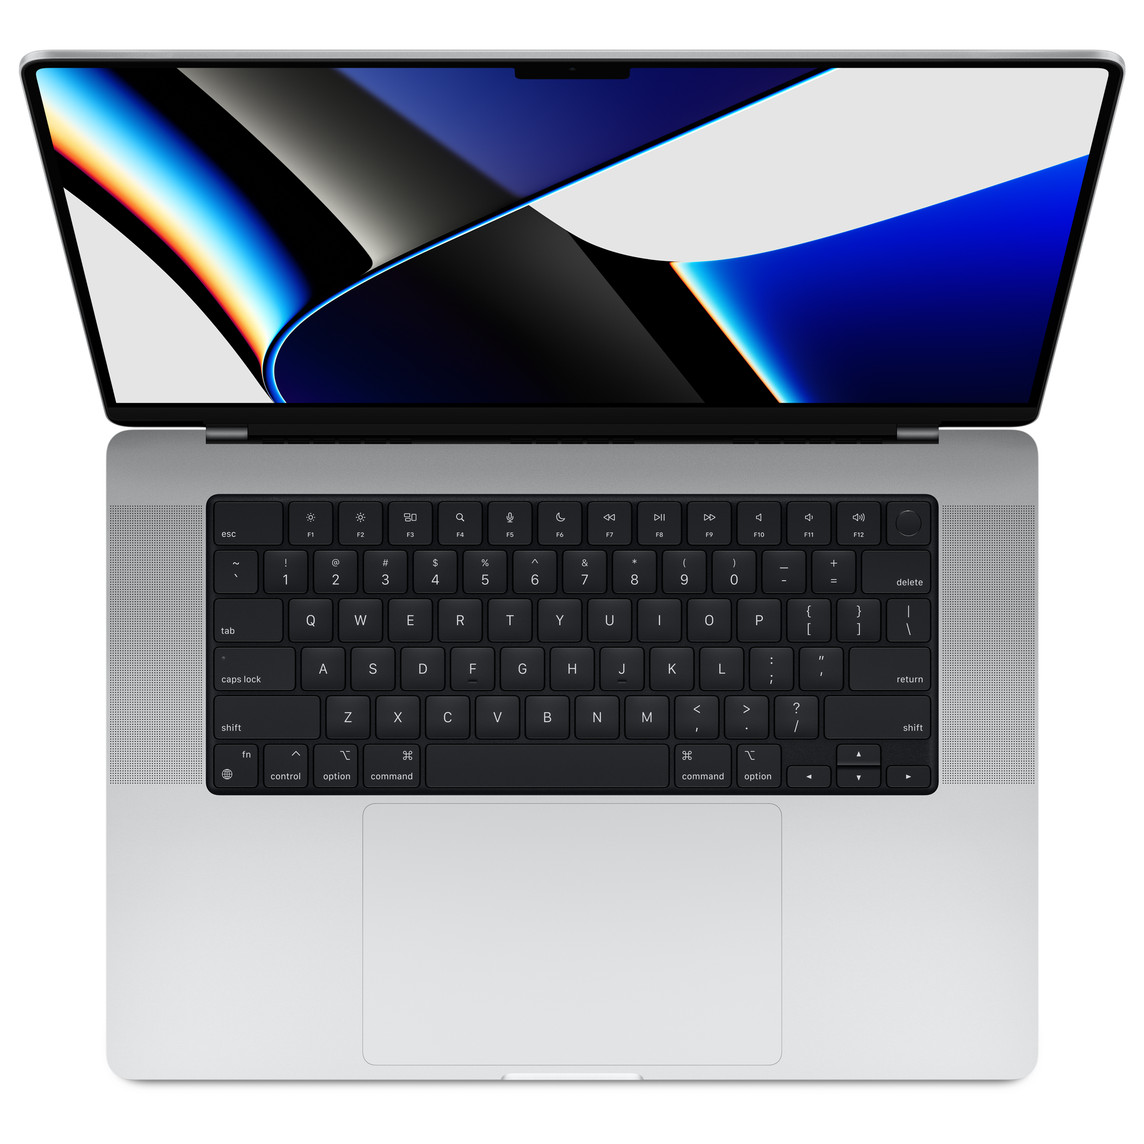 MacBook Pro, open top, display, keyboard with full height function key row and circular Touch ID button, trackpad, Silver